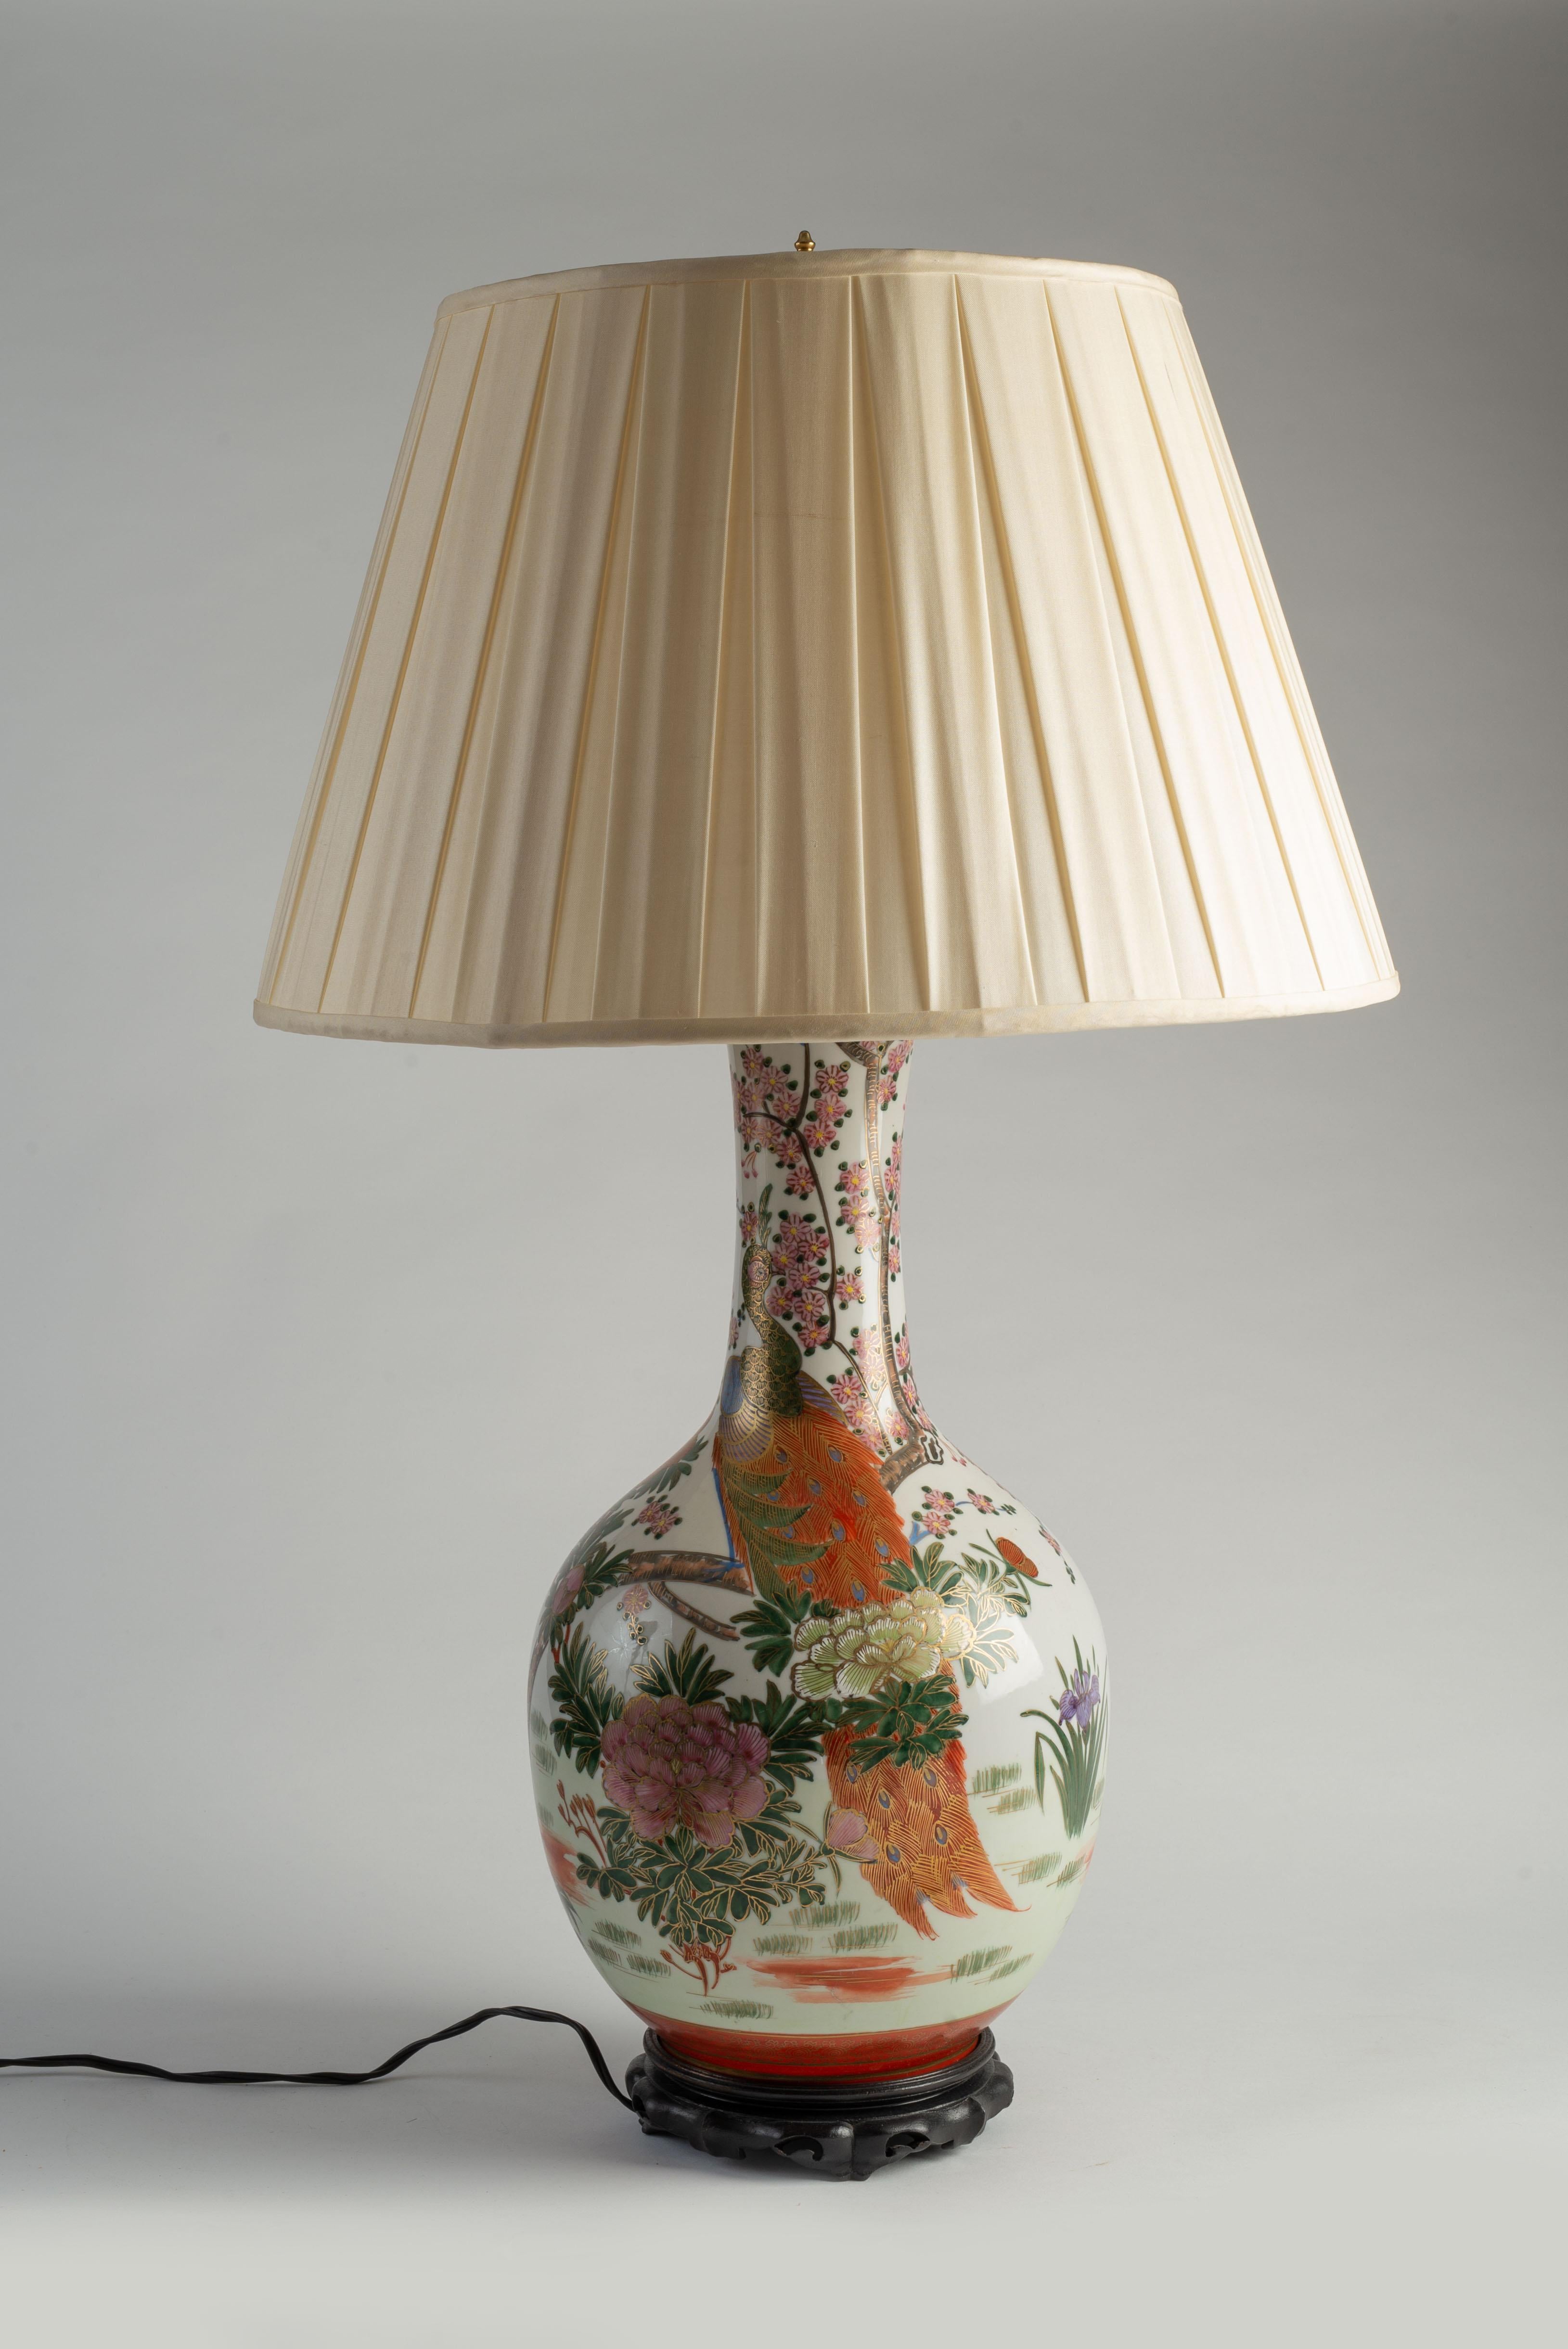 Each porcelain vase finely decorated with vividly colored flowers, reeds and peacocks in the Chinese Famille Rose style, each raised on a Chinese style wood base and adorned with a silk shade. 